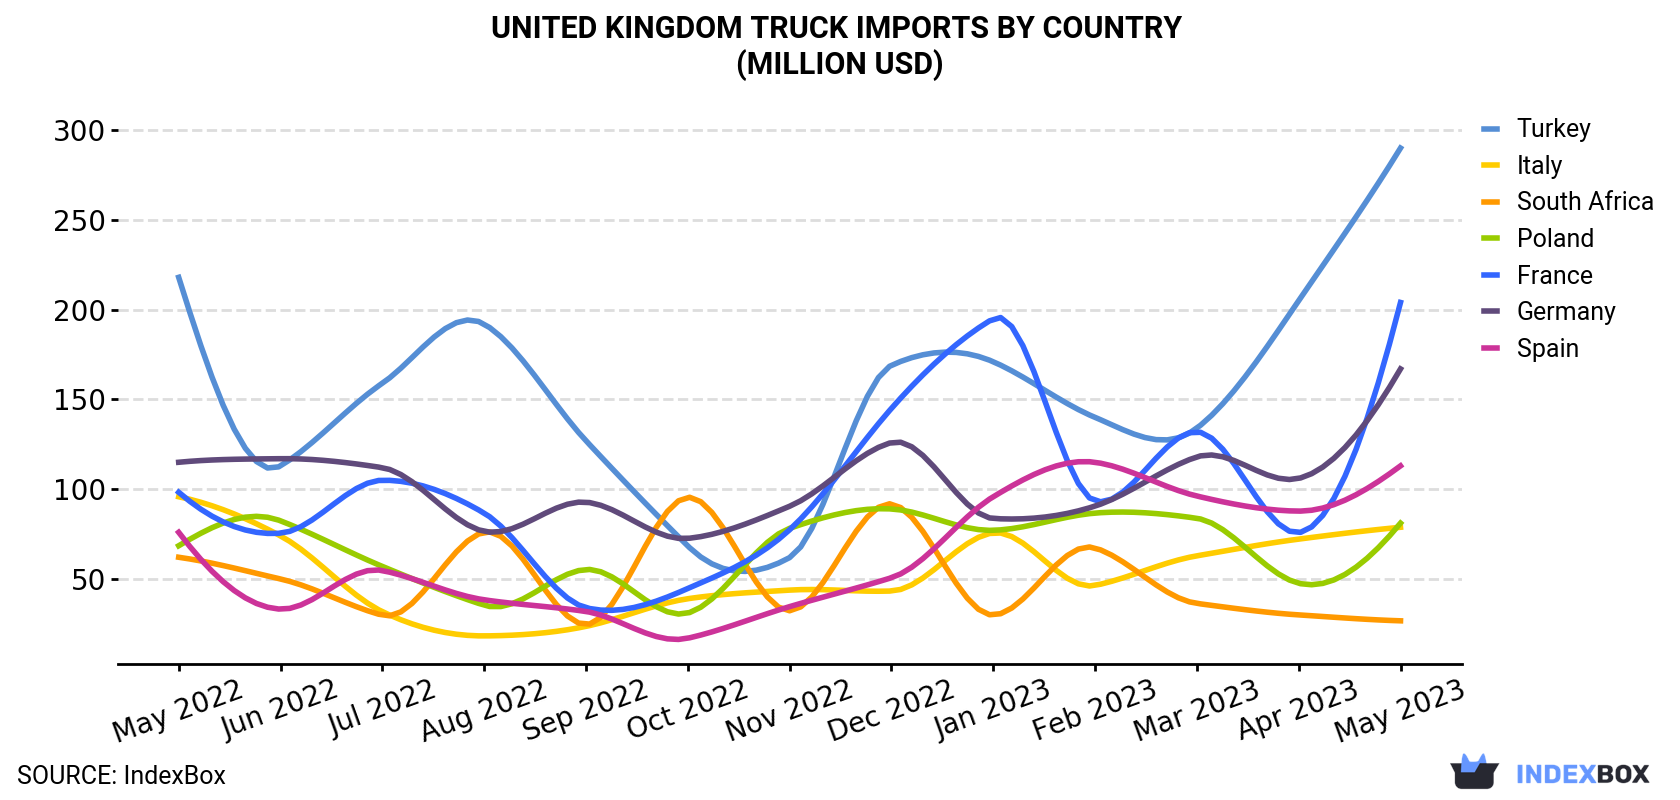 United Kingdom Truck Imports By Country (Million USD)